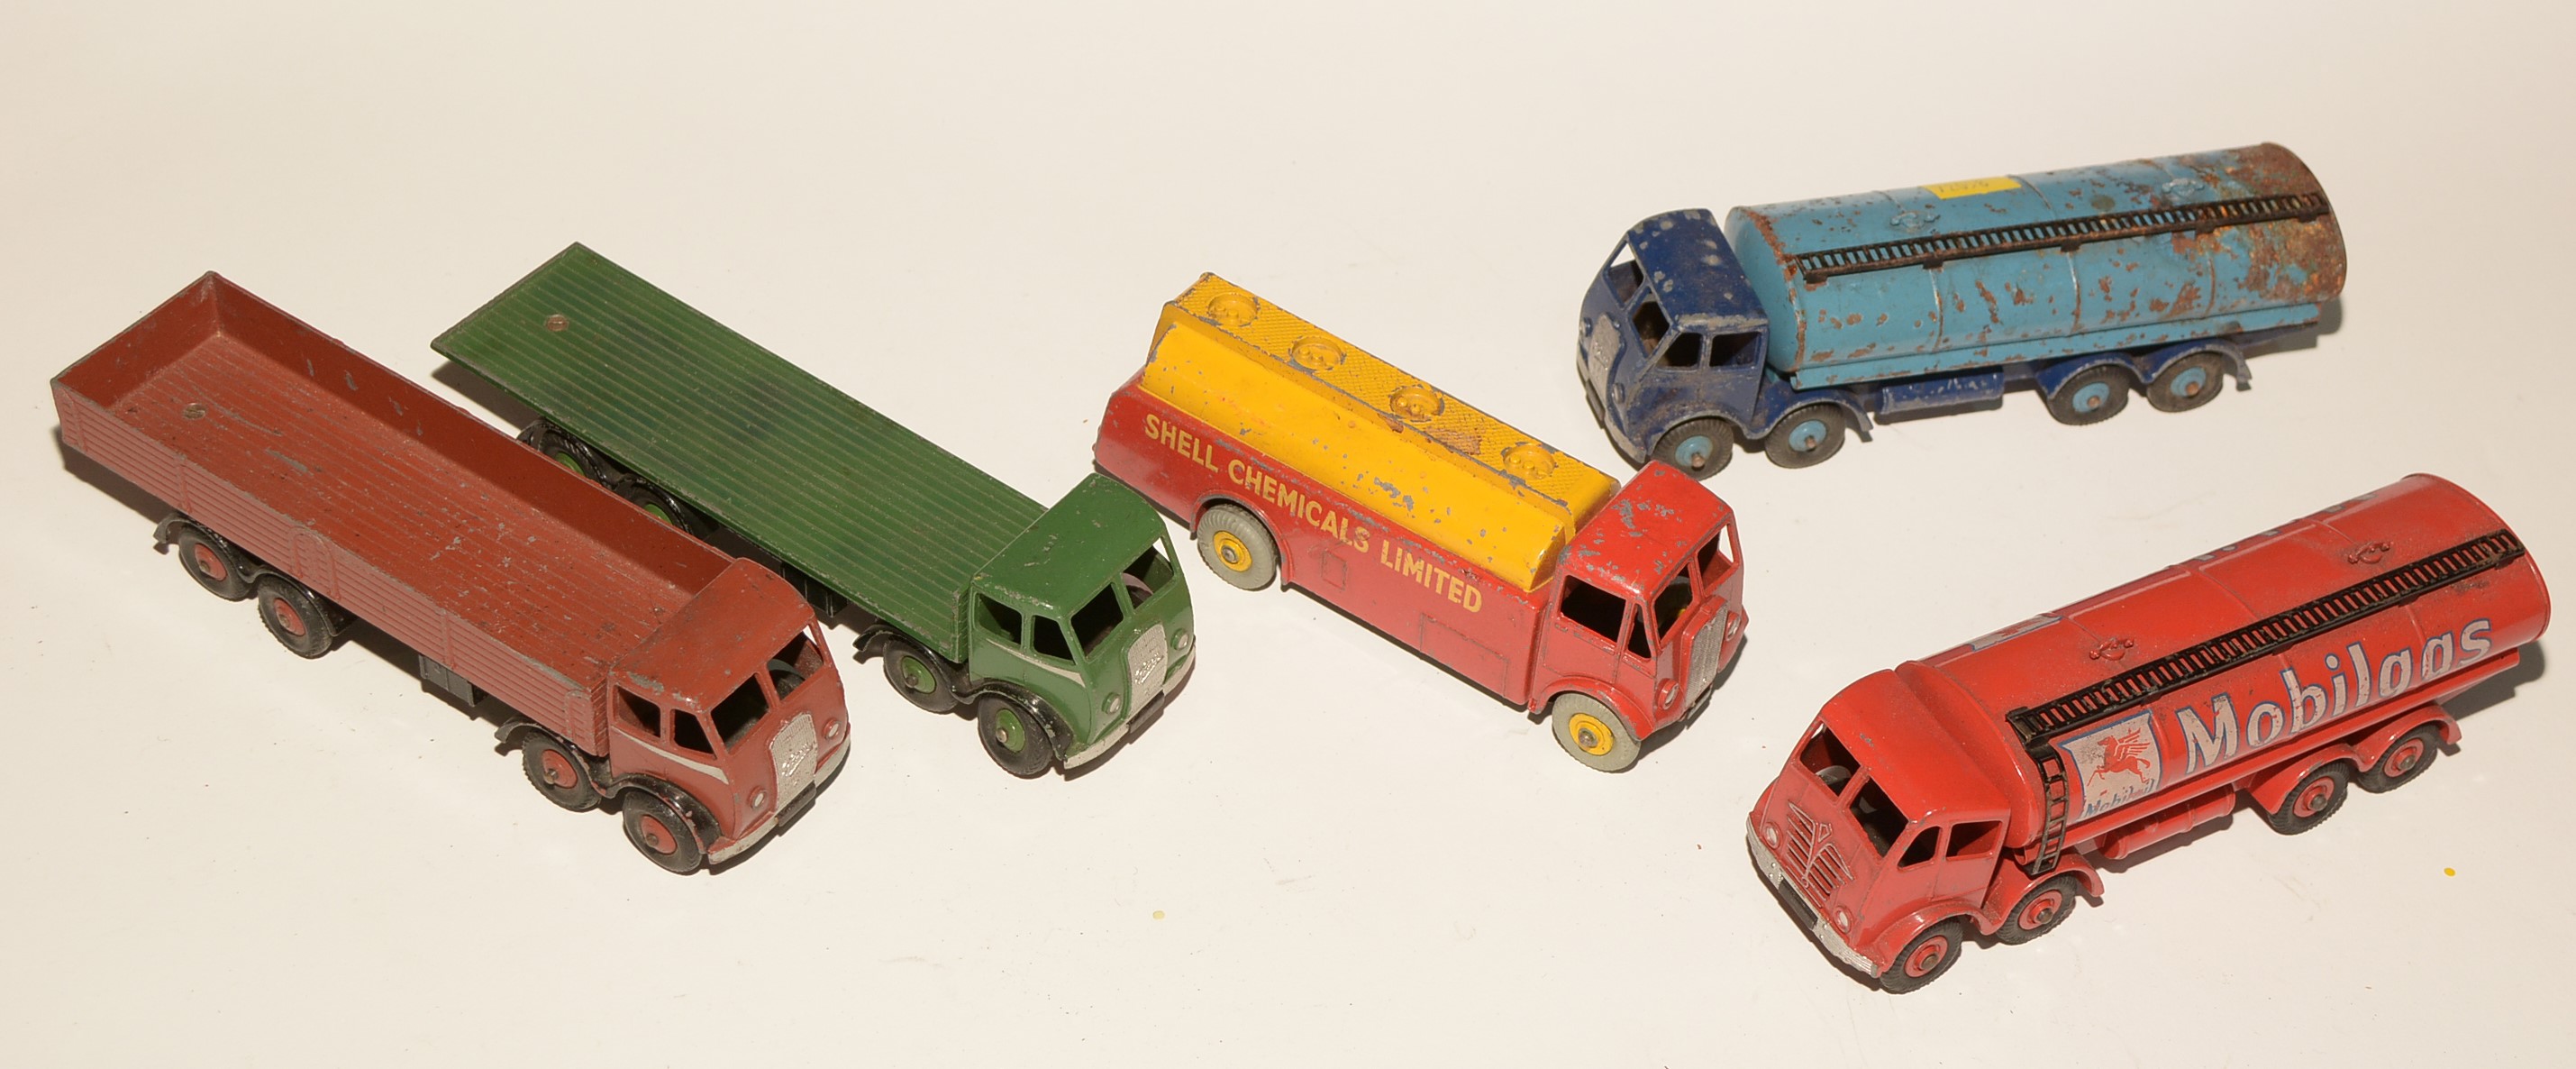 Dinky diecast vehicles unboxed.